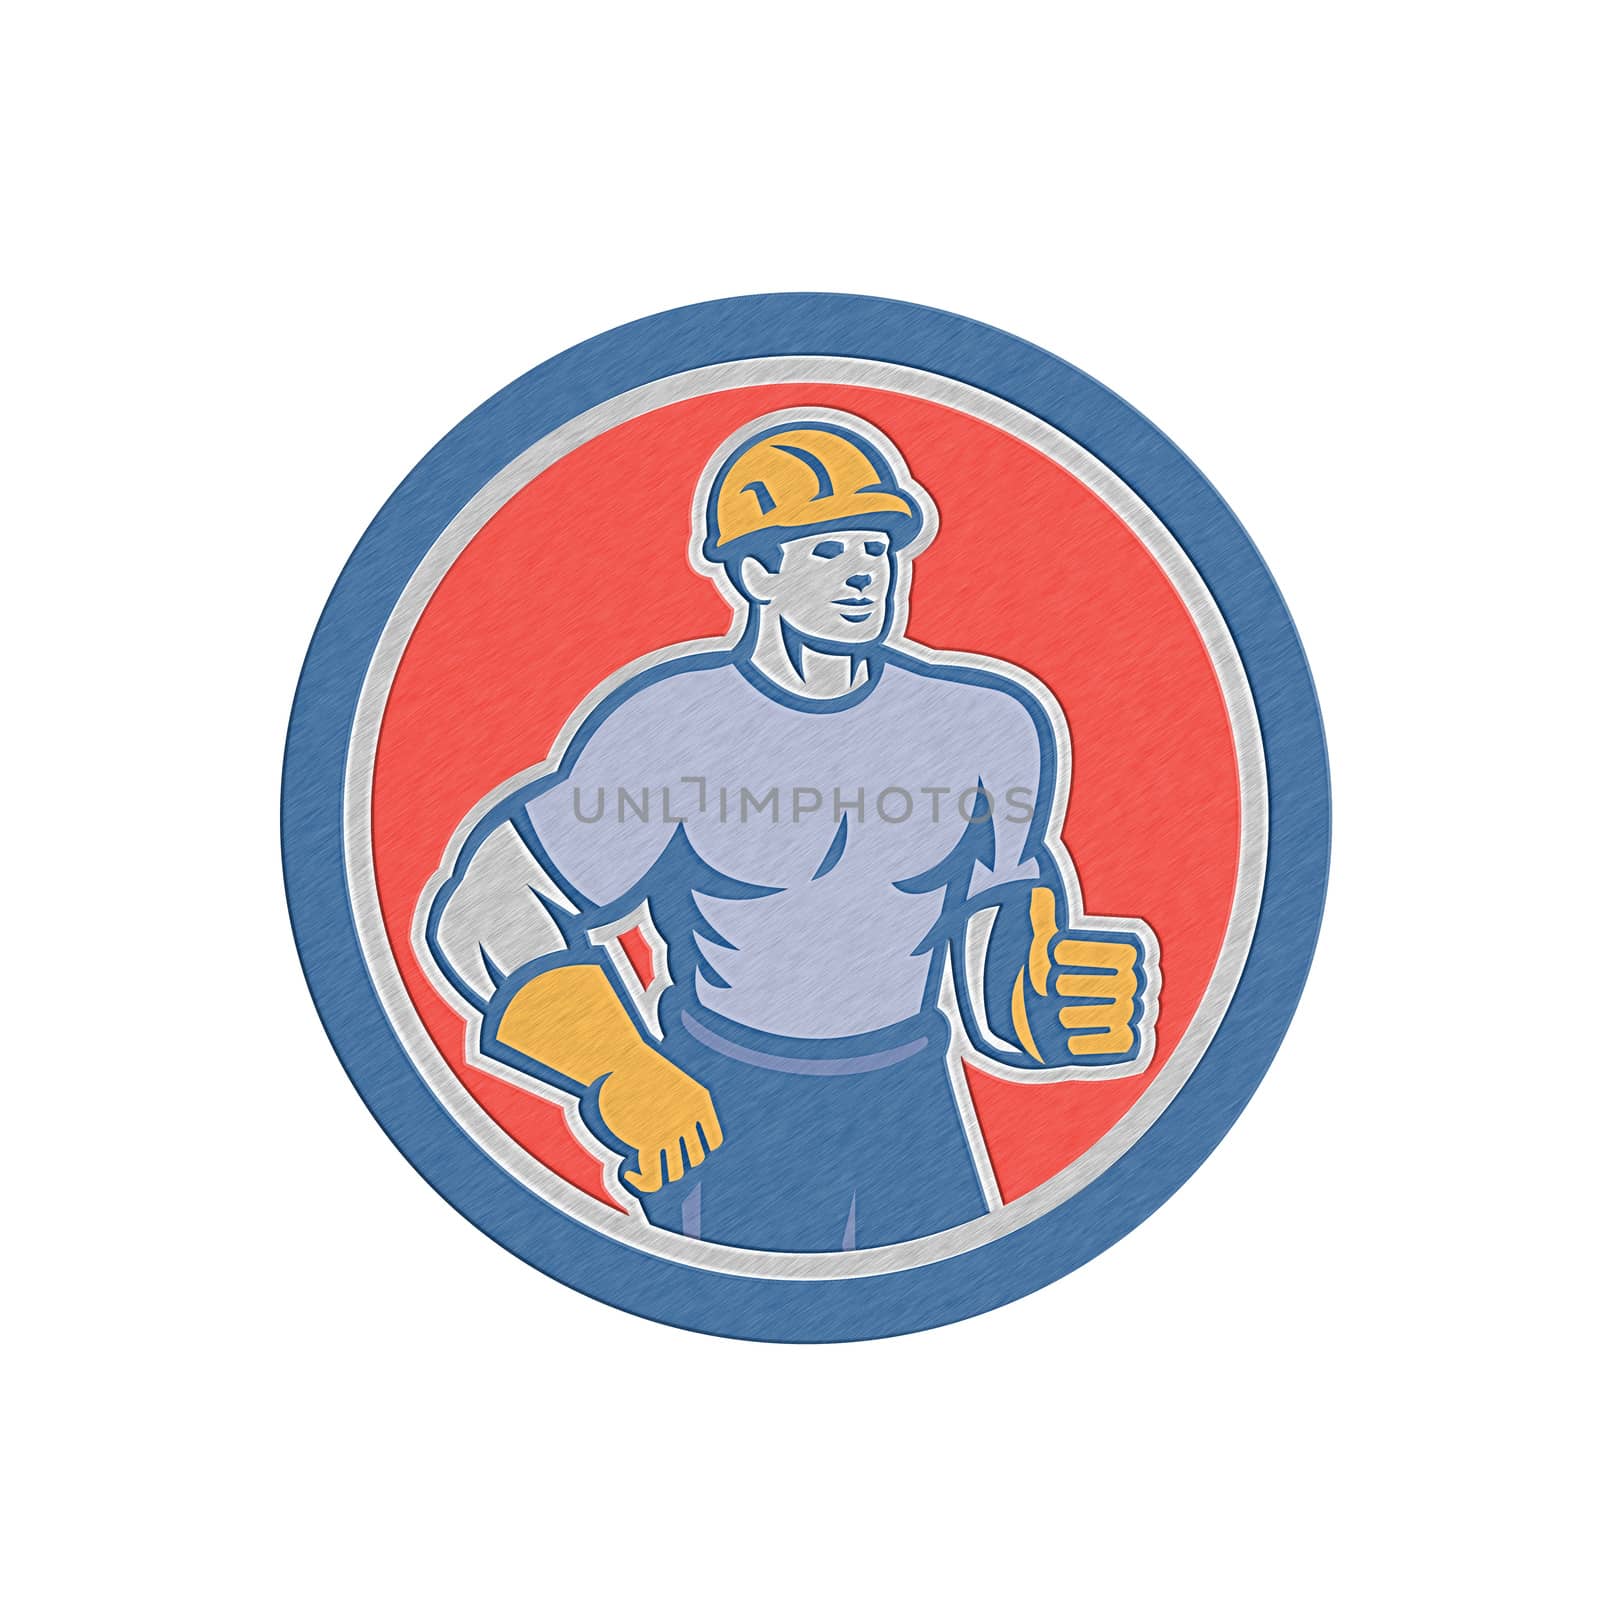 Metallic styled illustration of a construction worker wearing hardhat standing thumbs up facing front set inside circle done in retro style.